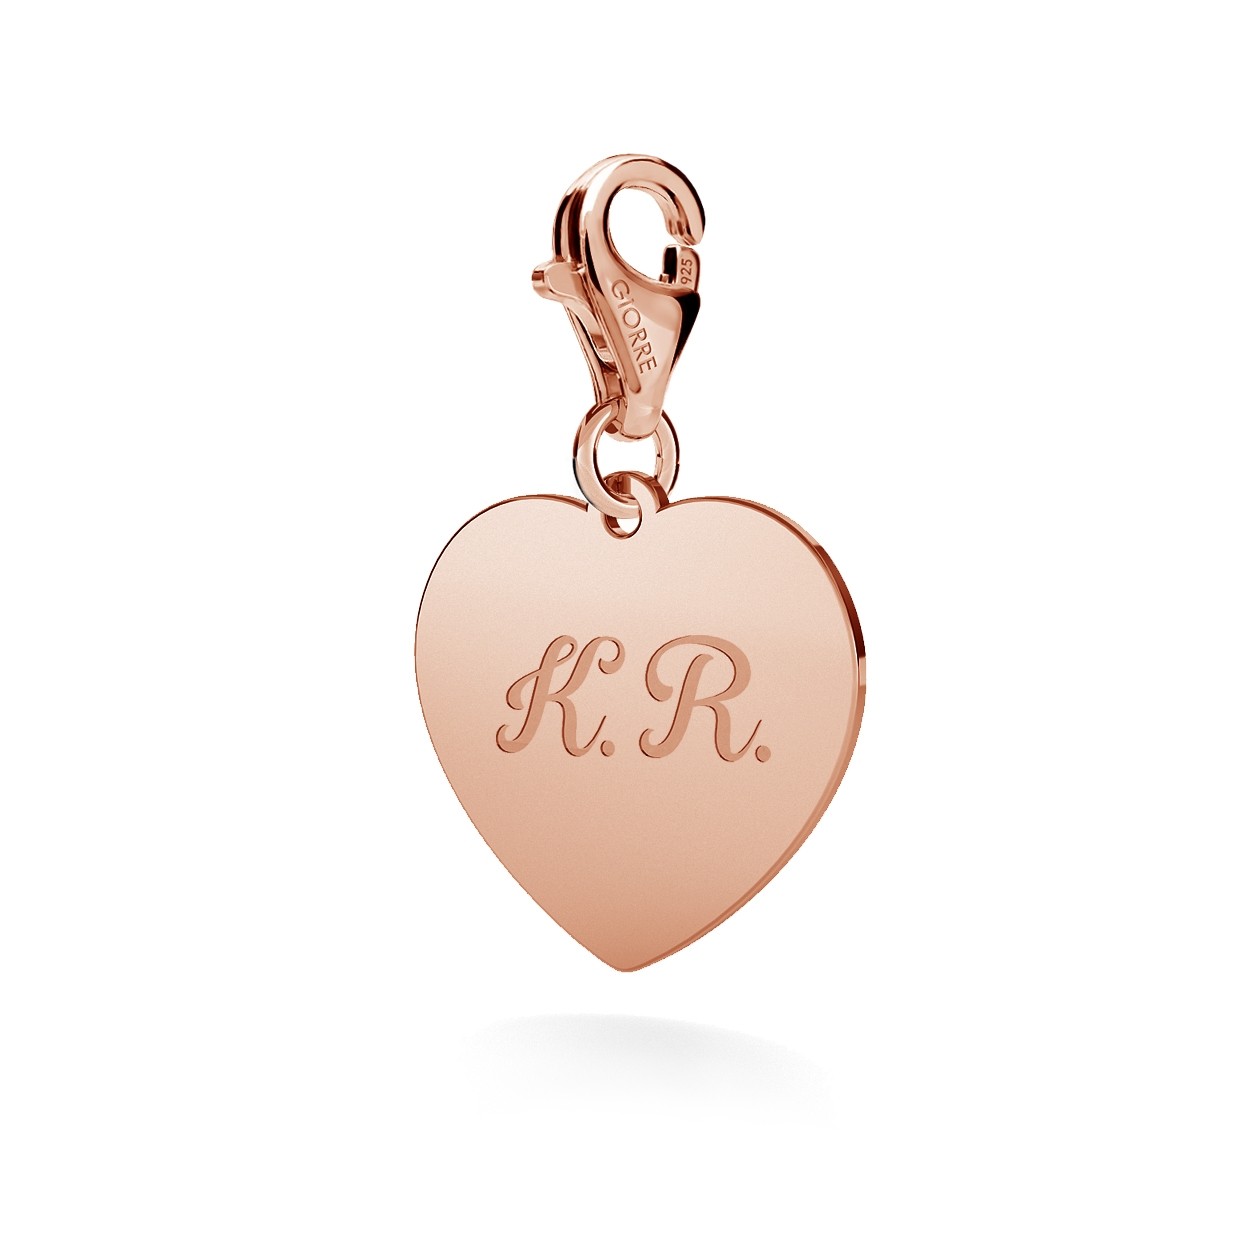 CHARM WITH ENGRAVE, HEART, SILVER 925, RHODIUM OR GOLD PLATED